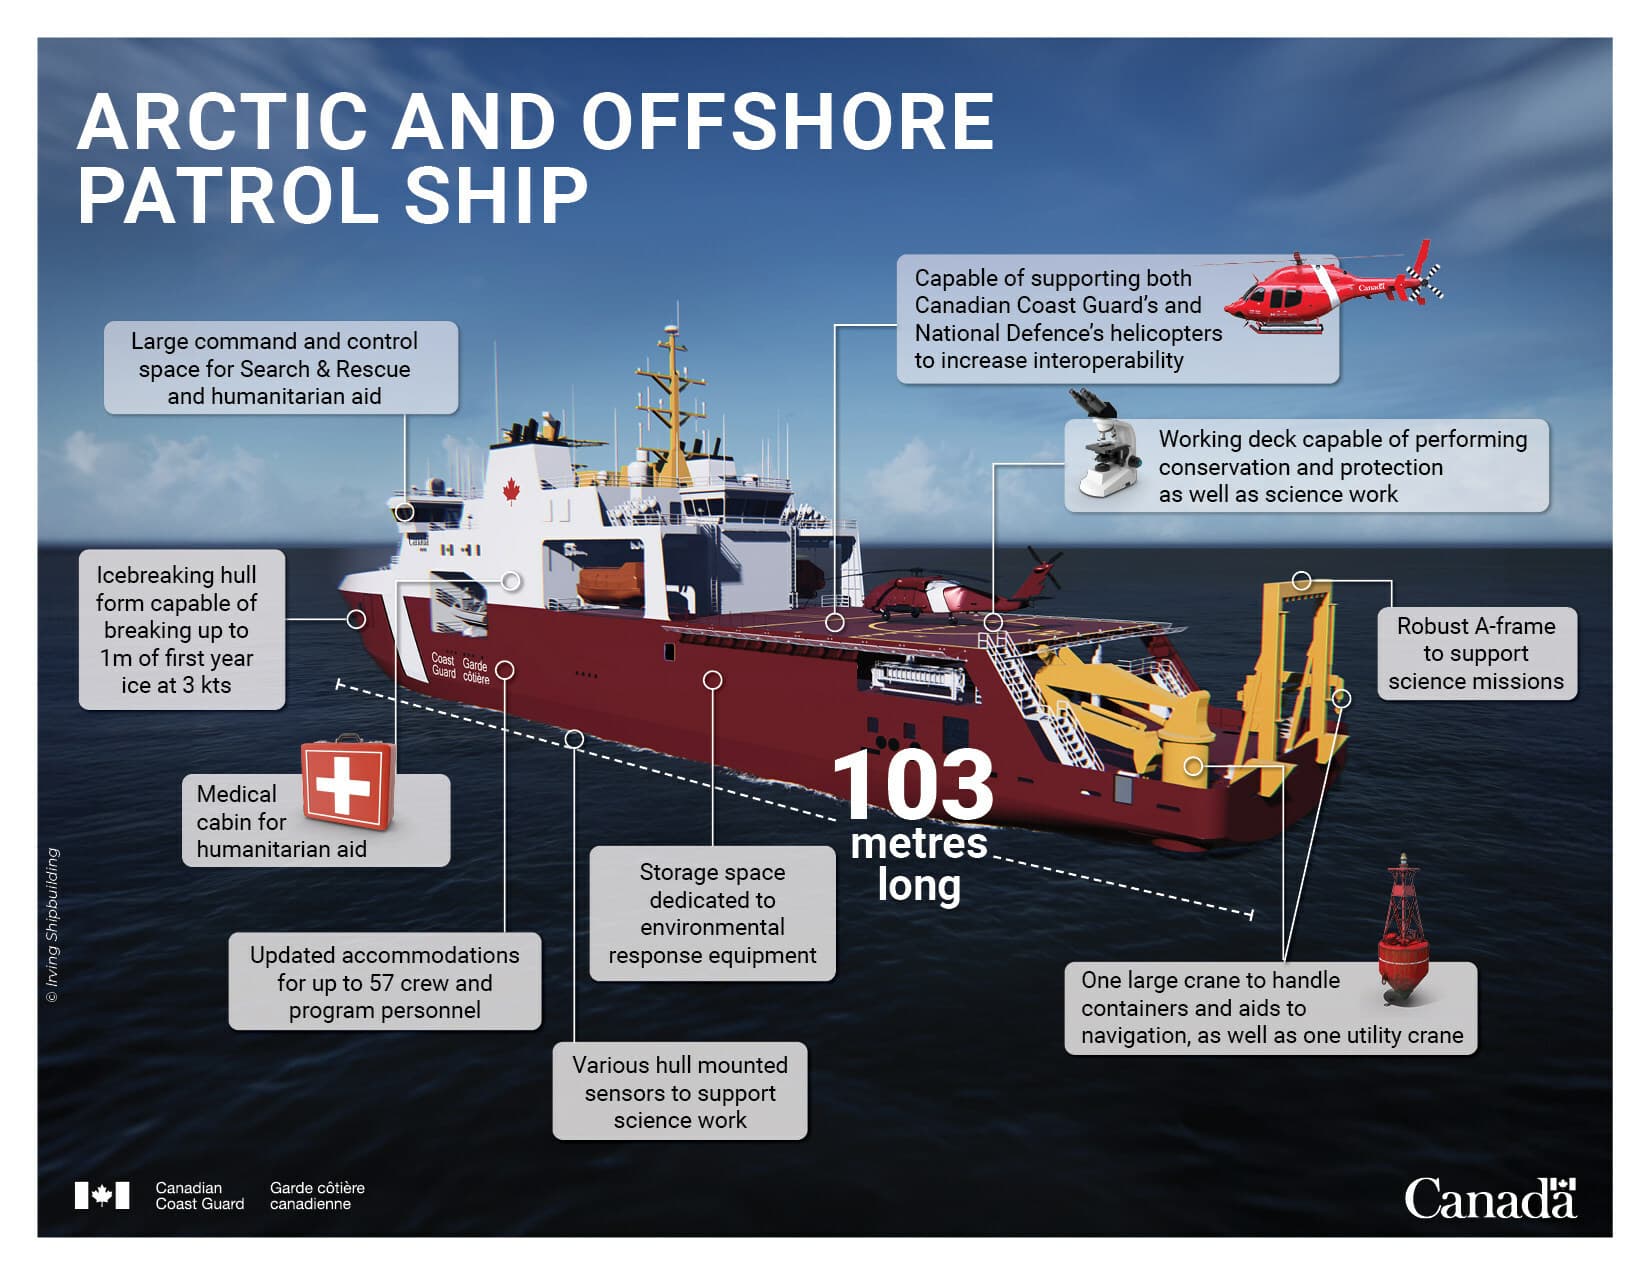 Canadian Coast Guard-Construction officially begins on the first